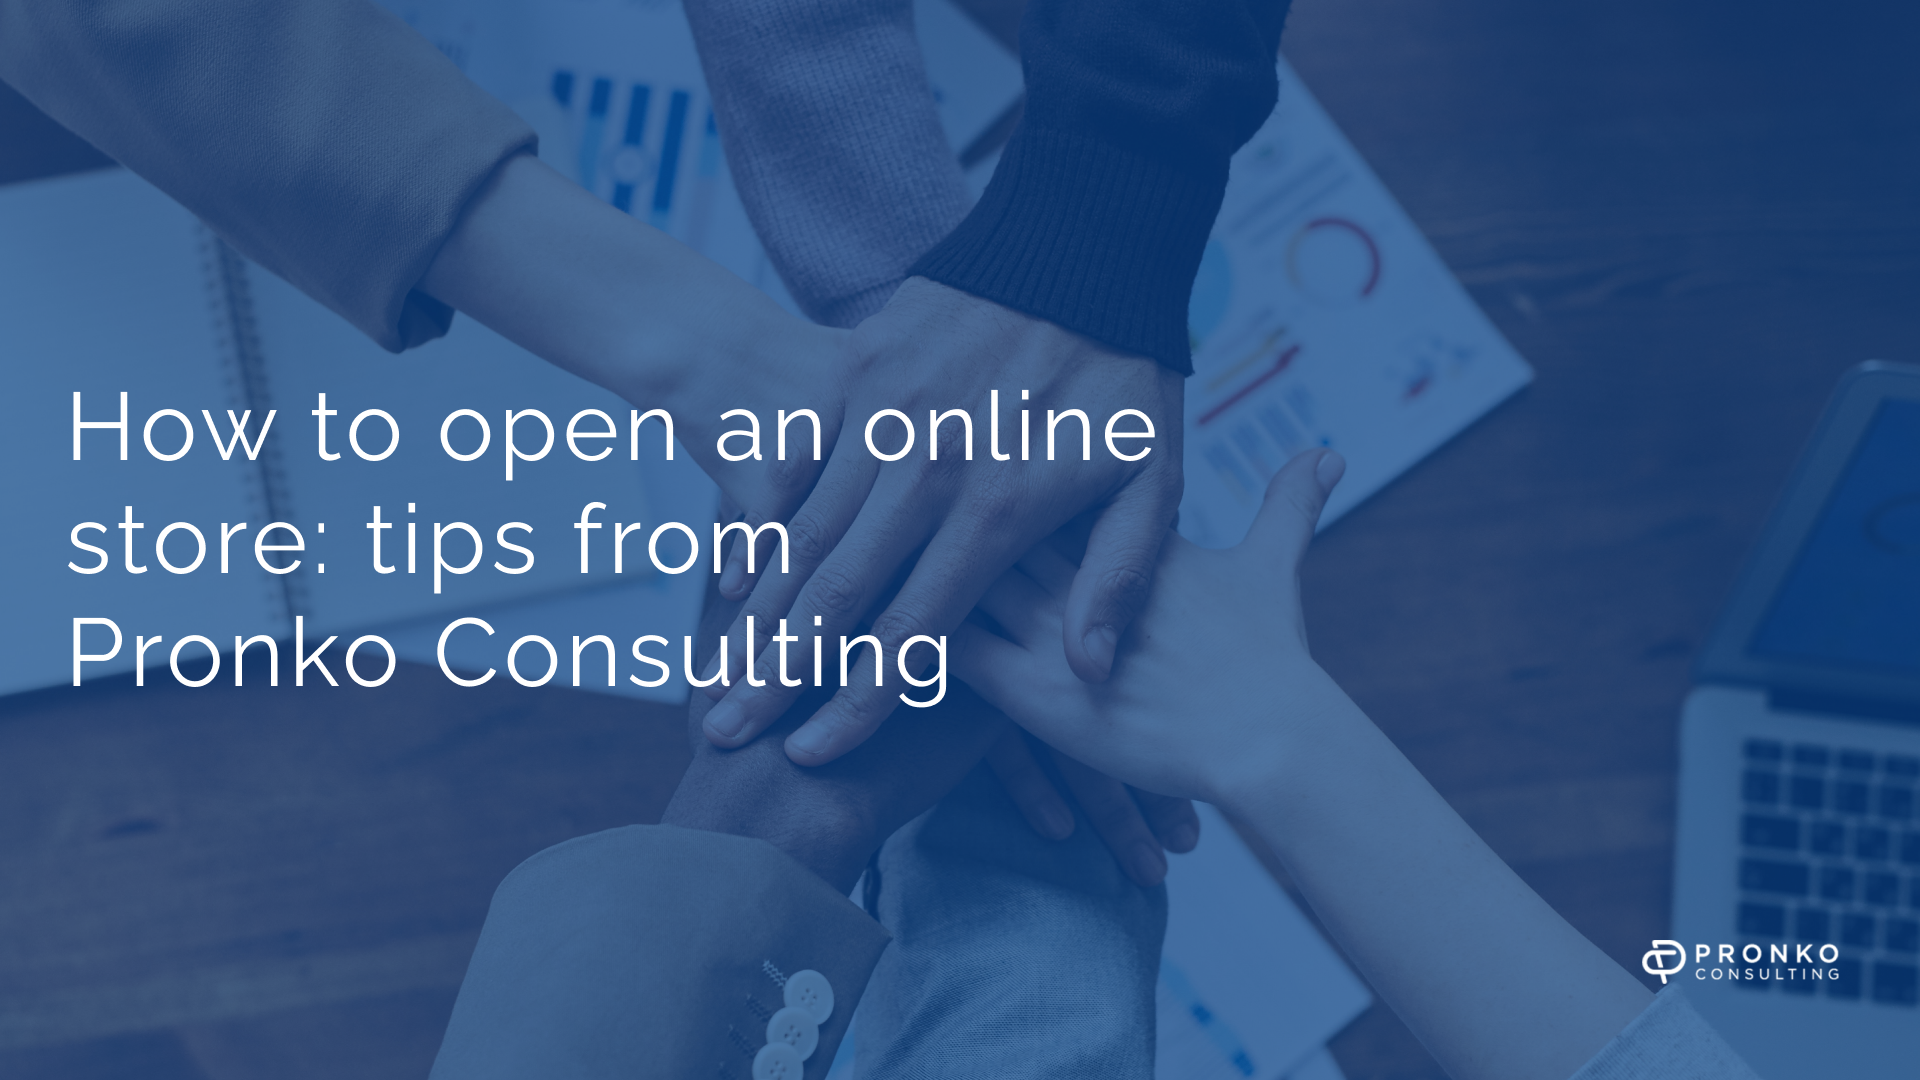 How to open an online store: tips from Pronko Consulting